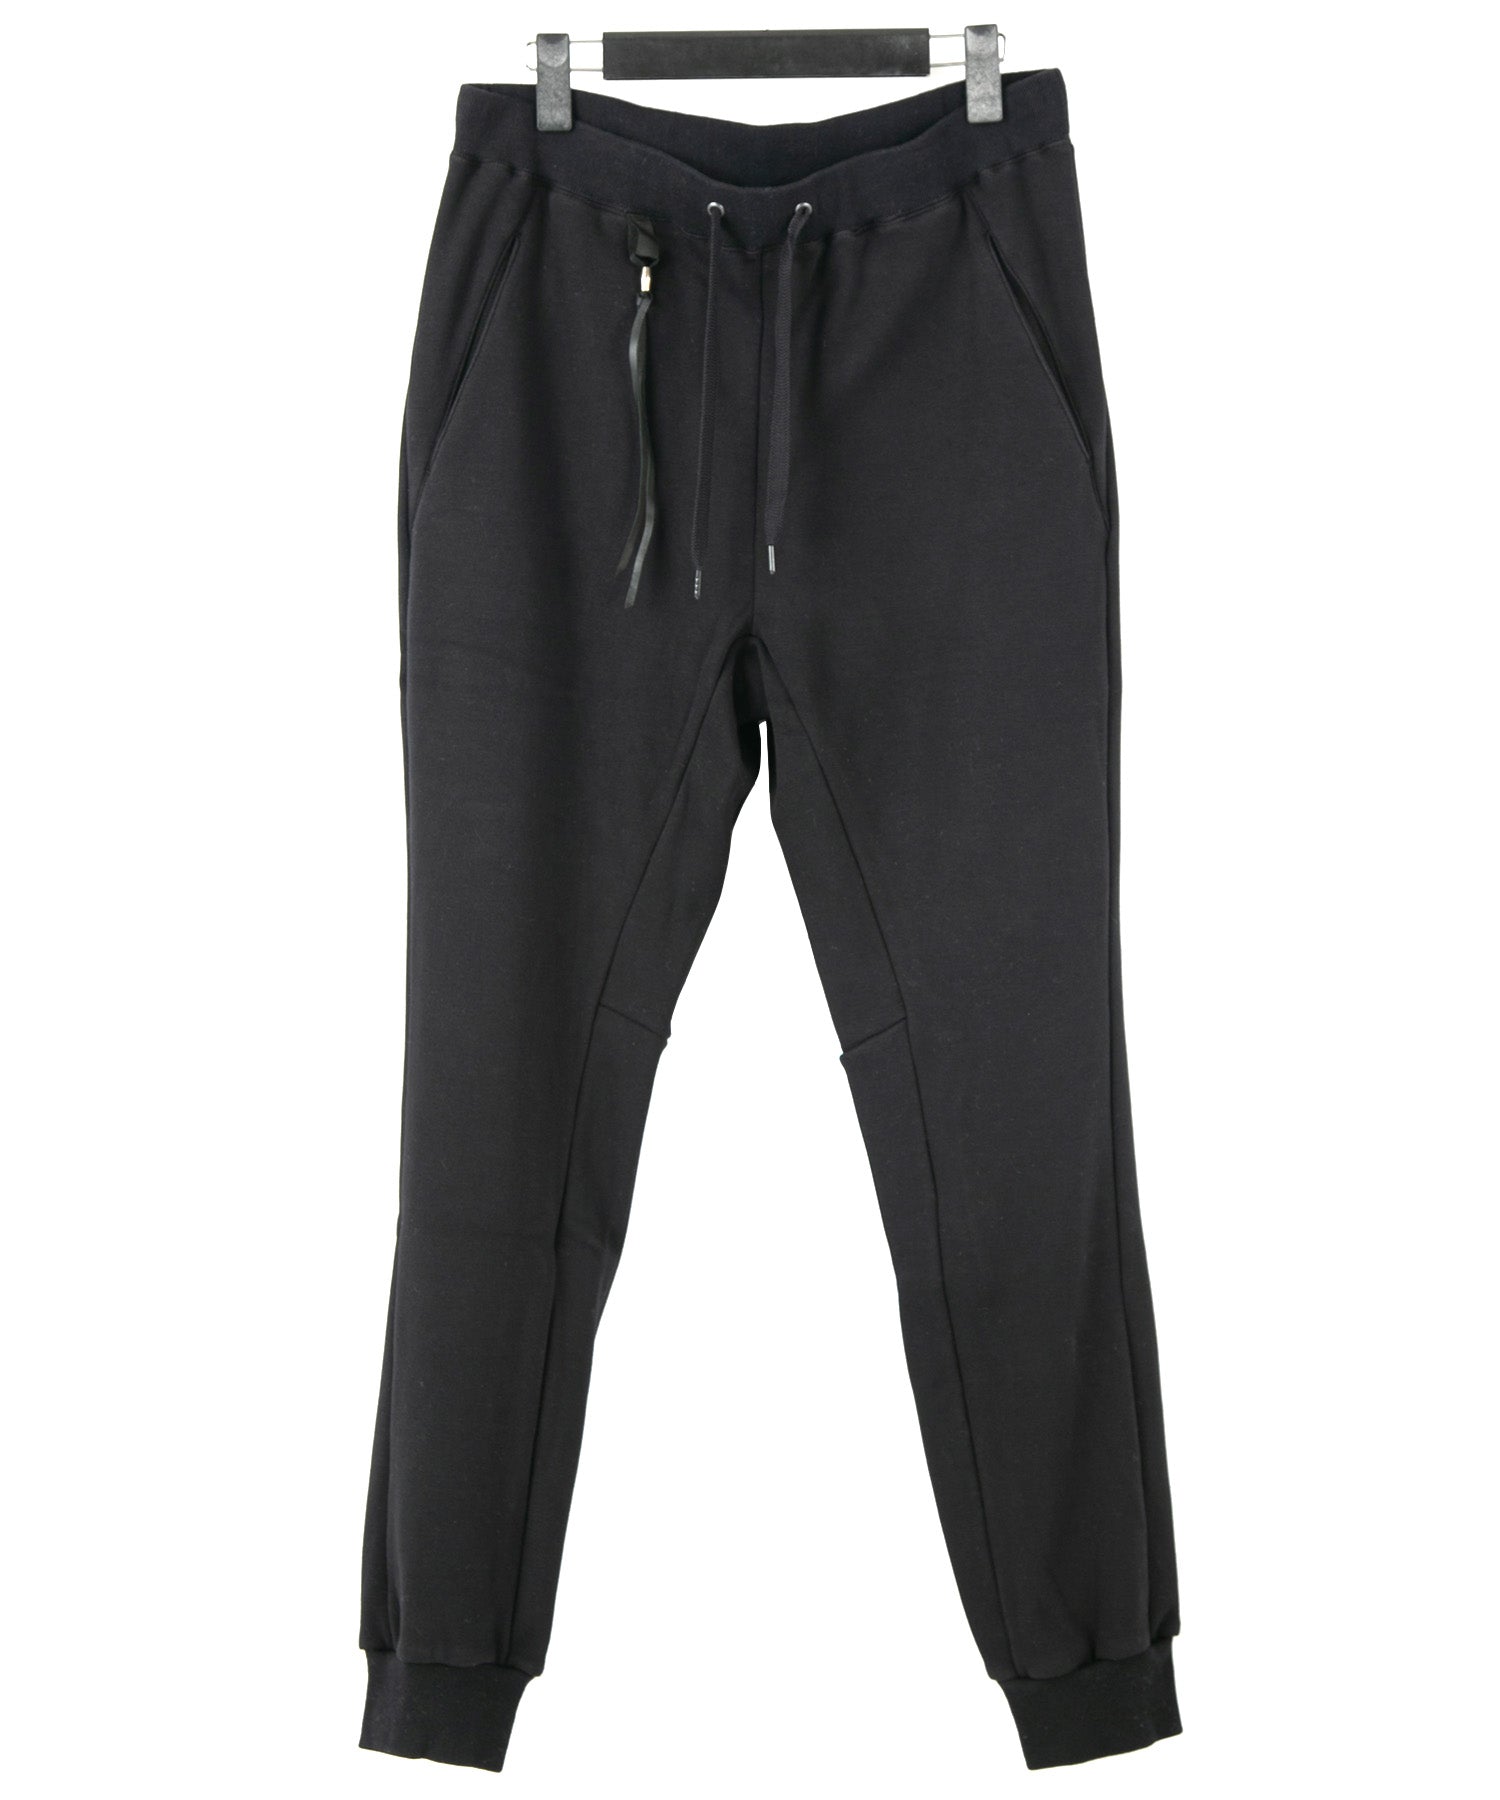 Load image into Gallery viewer, Stretch Cotton Polyester Knit Backside Velor finish Sweat pants - BLACK